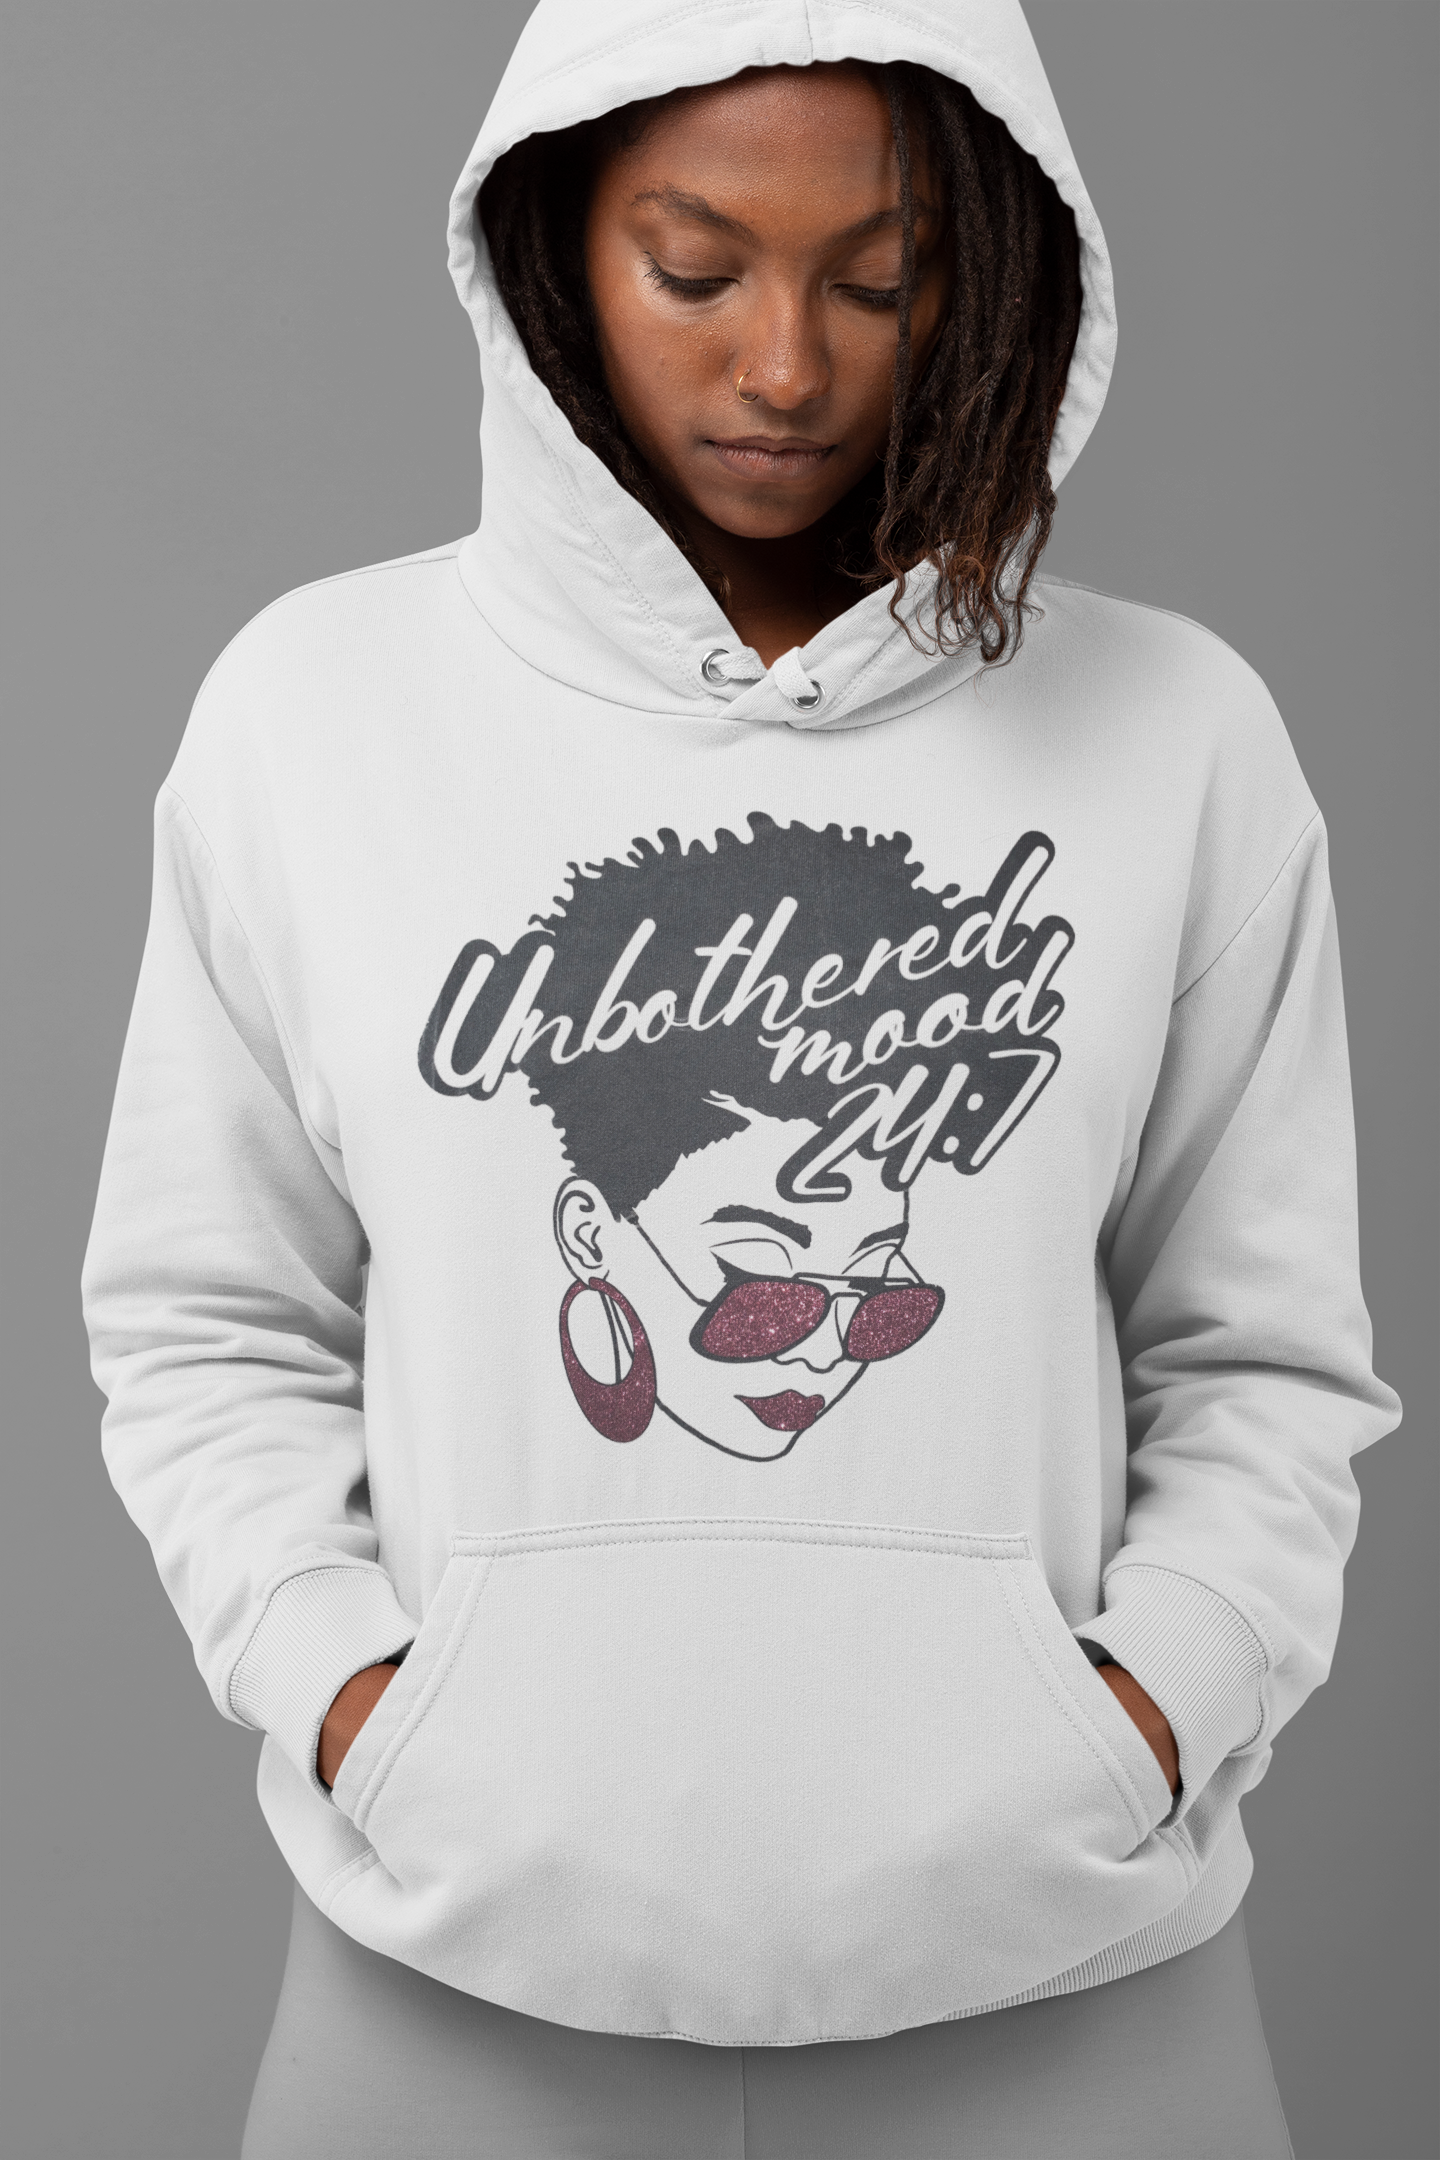 Unbothered 24/7 Heavyweight Hoodie